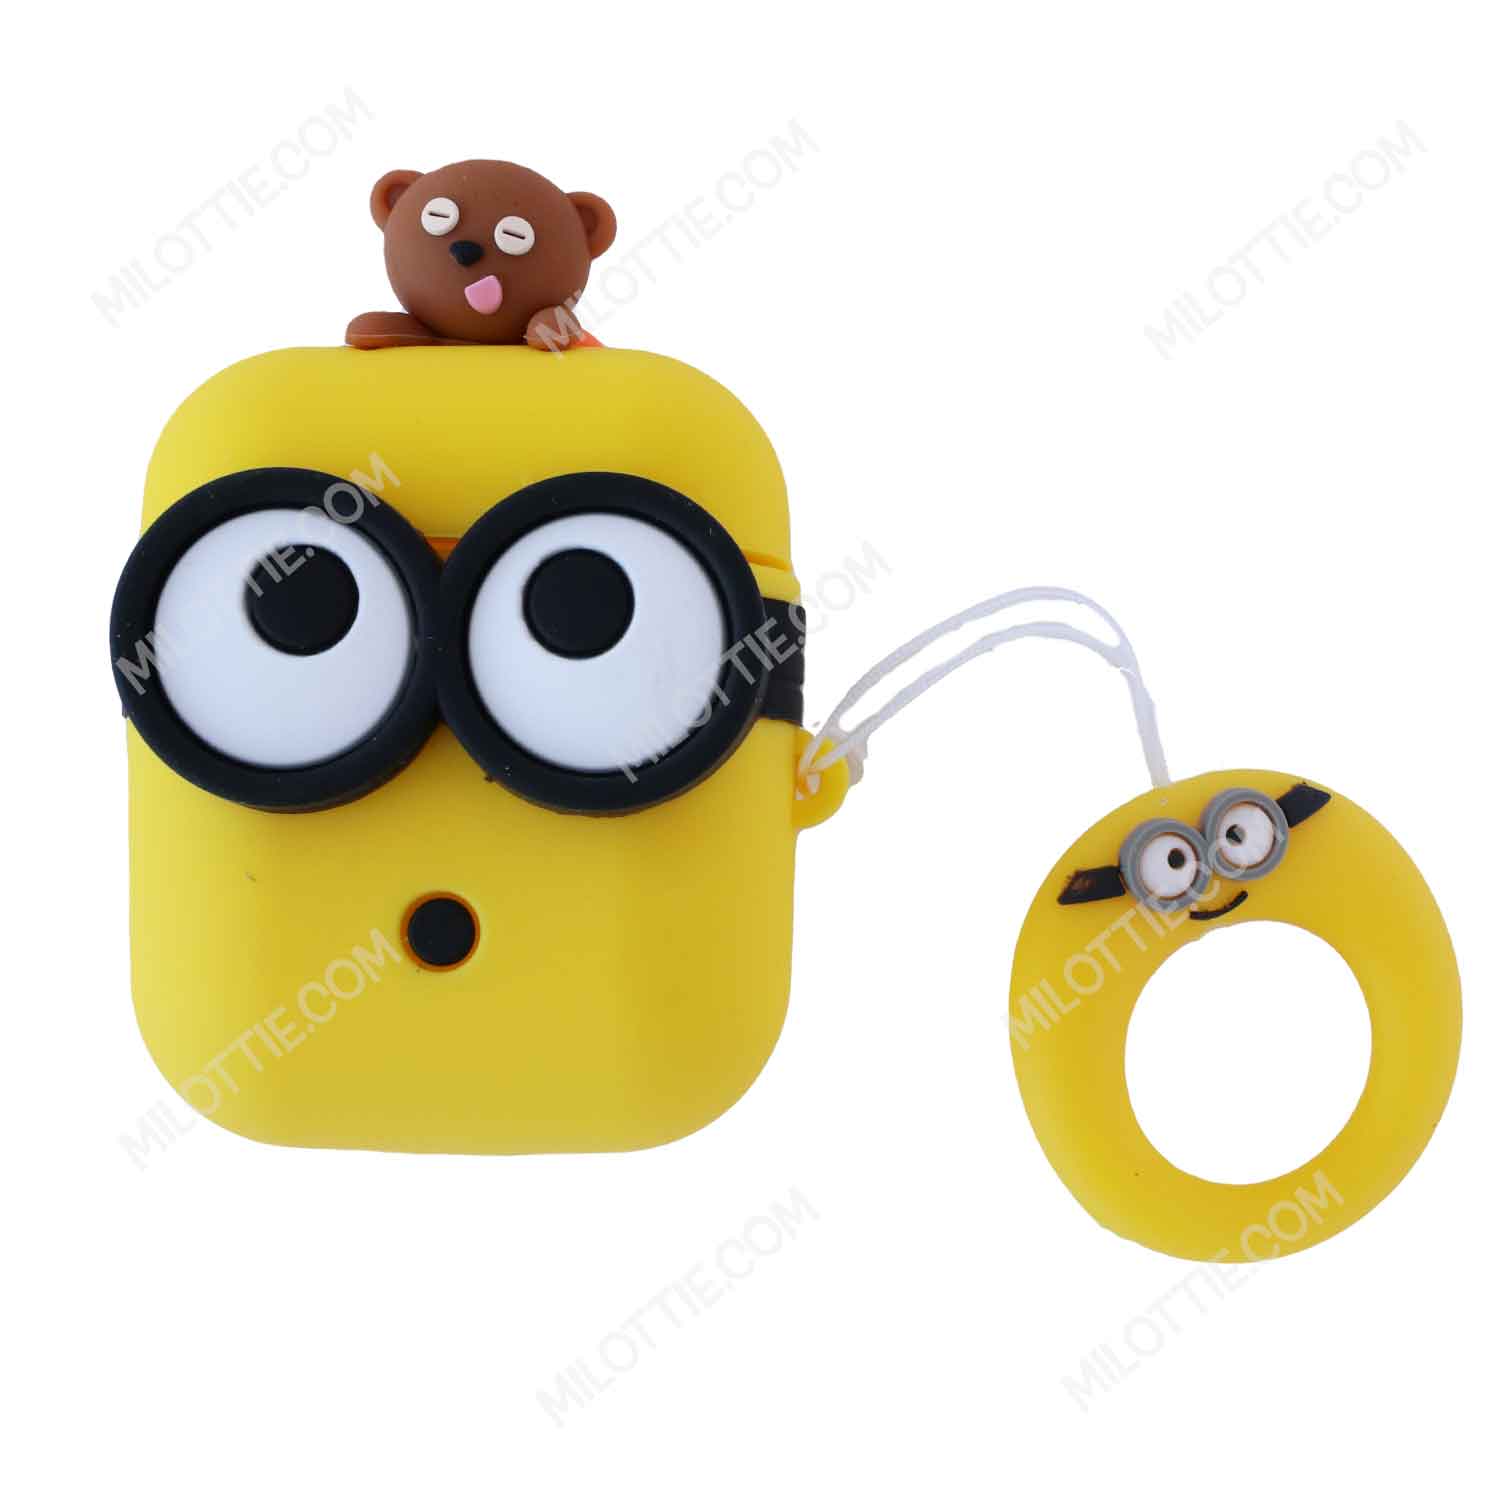 Minion with Teddy Bear Despicable Me Airpods Case-1